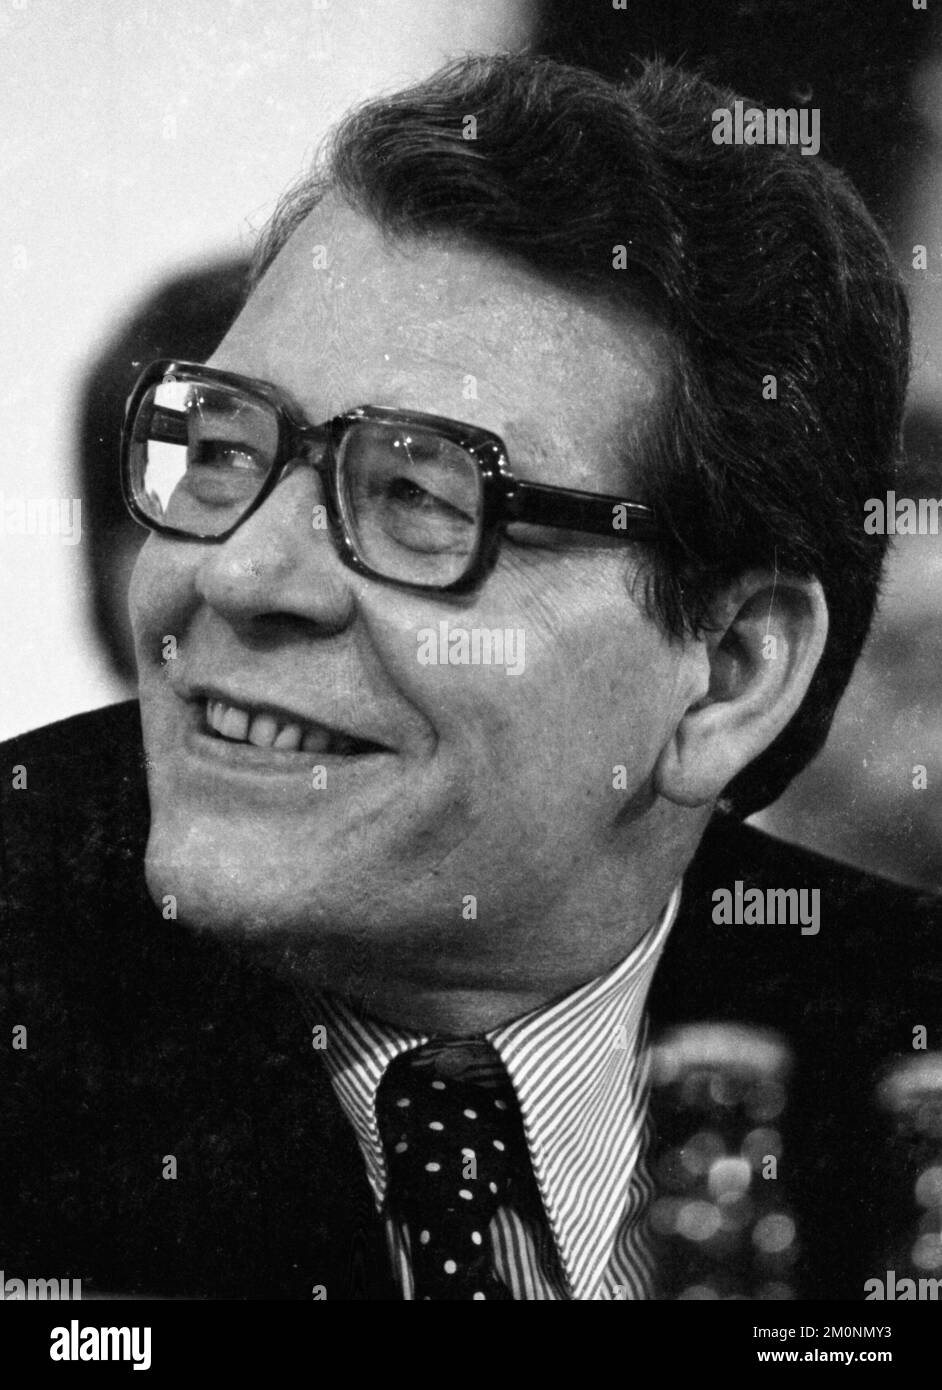 The Party Congress of the Christian Democratic Union (CDU) on 24.5.1976 in Hanover, Heinrich Köppler, Germany, Europe Stock Photo